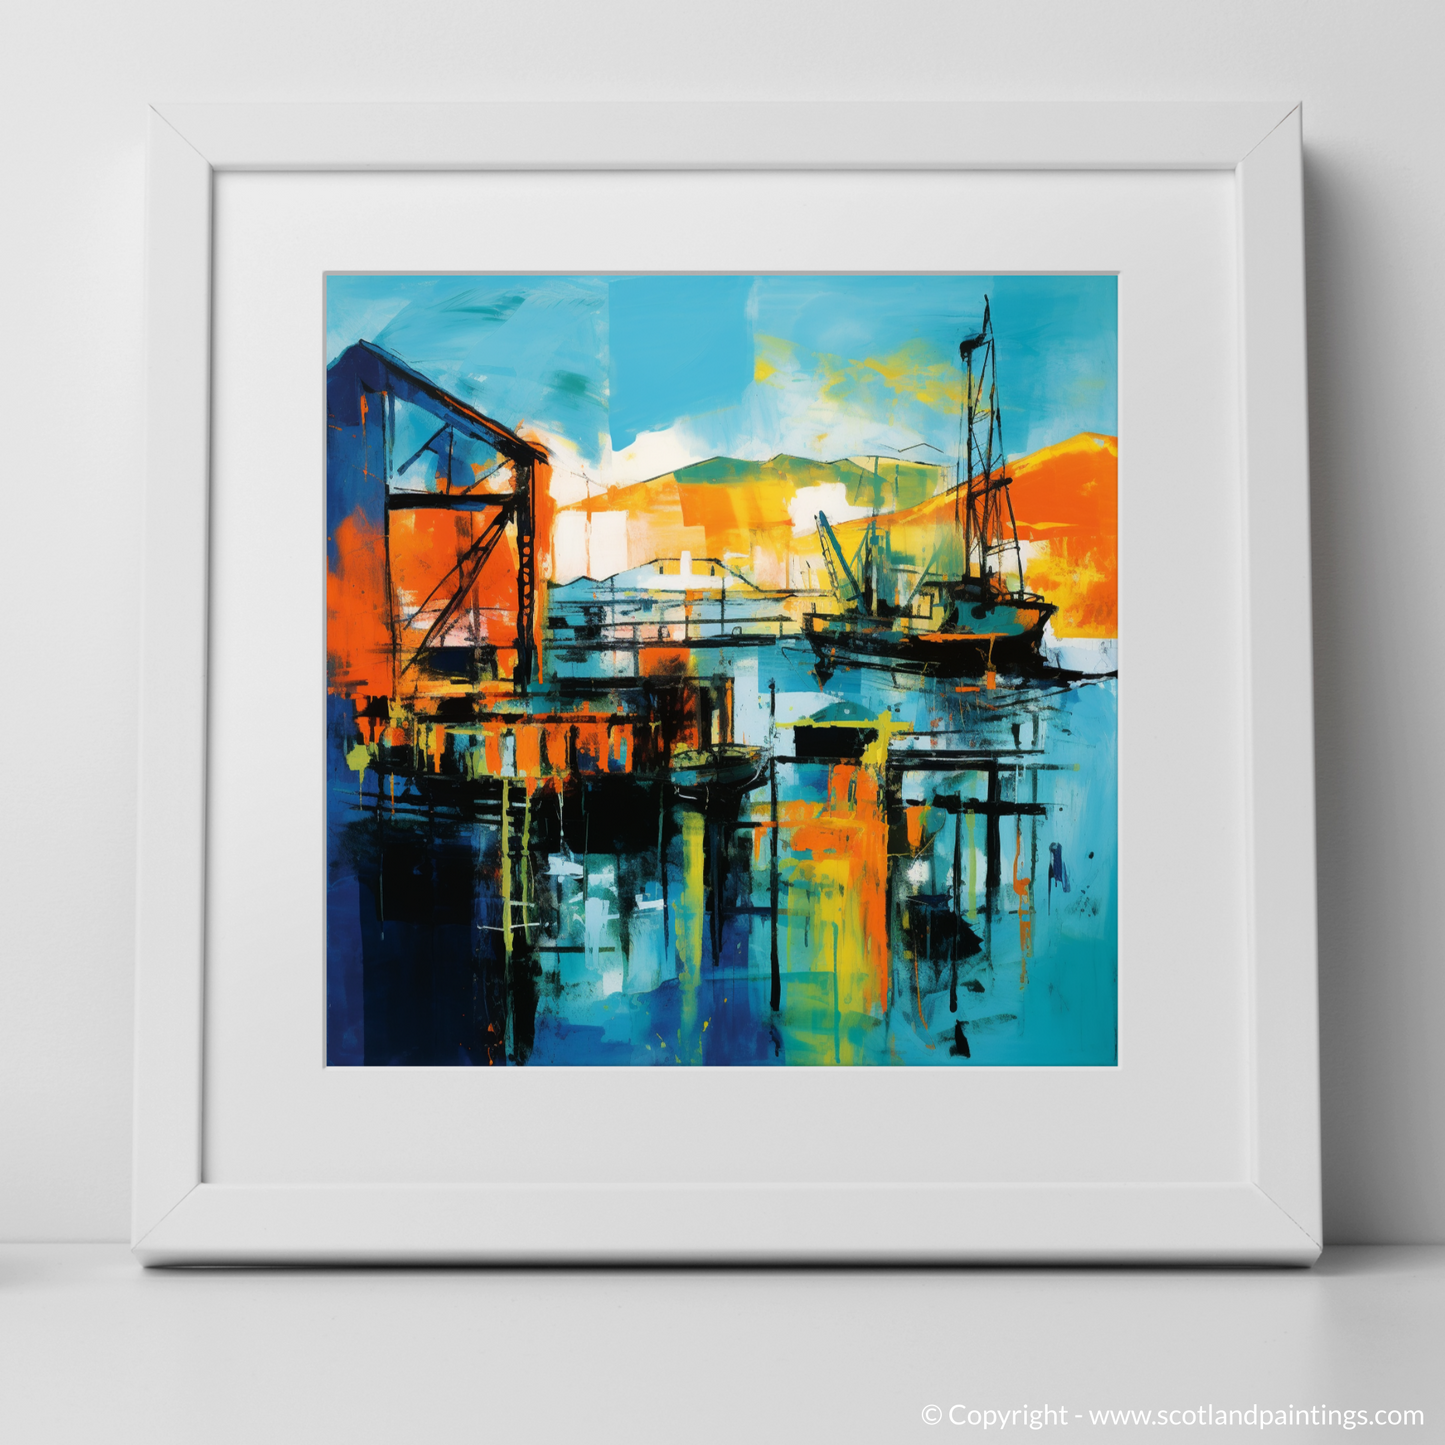 Greenock at Dusk: An Abstract Impressionist Ode to a Scottish Port City